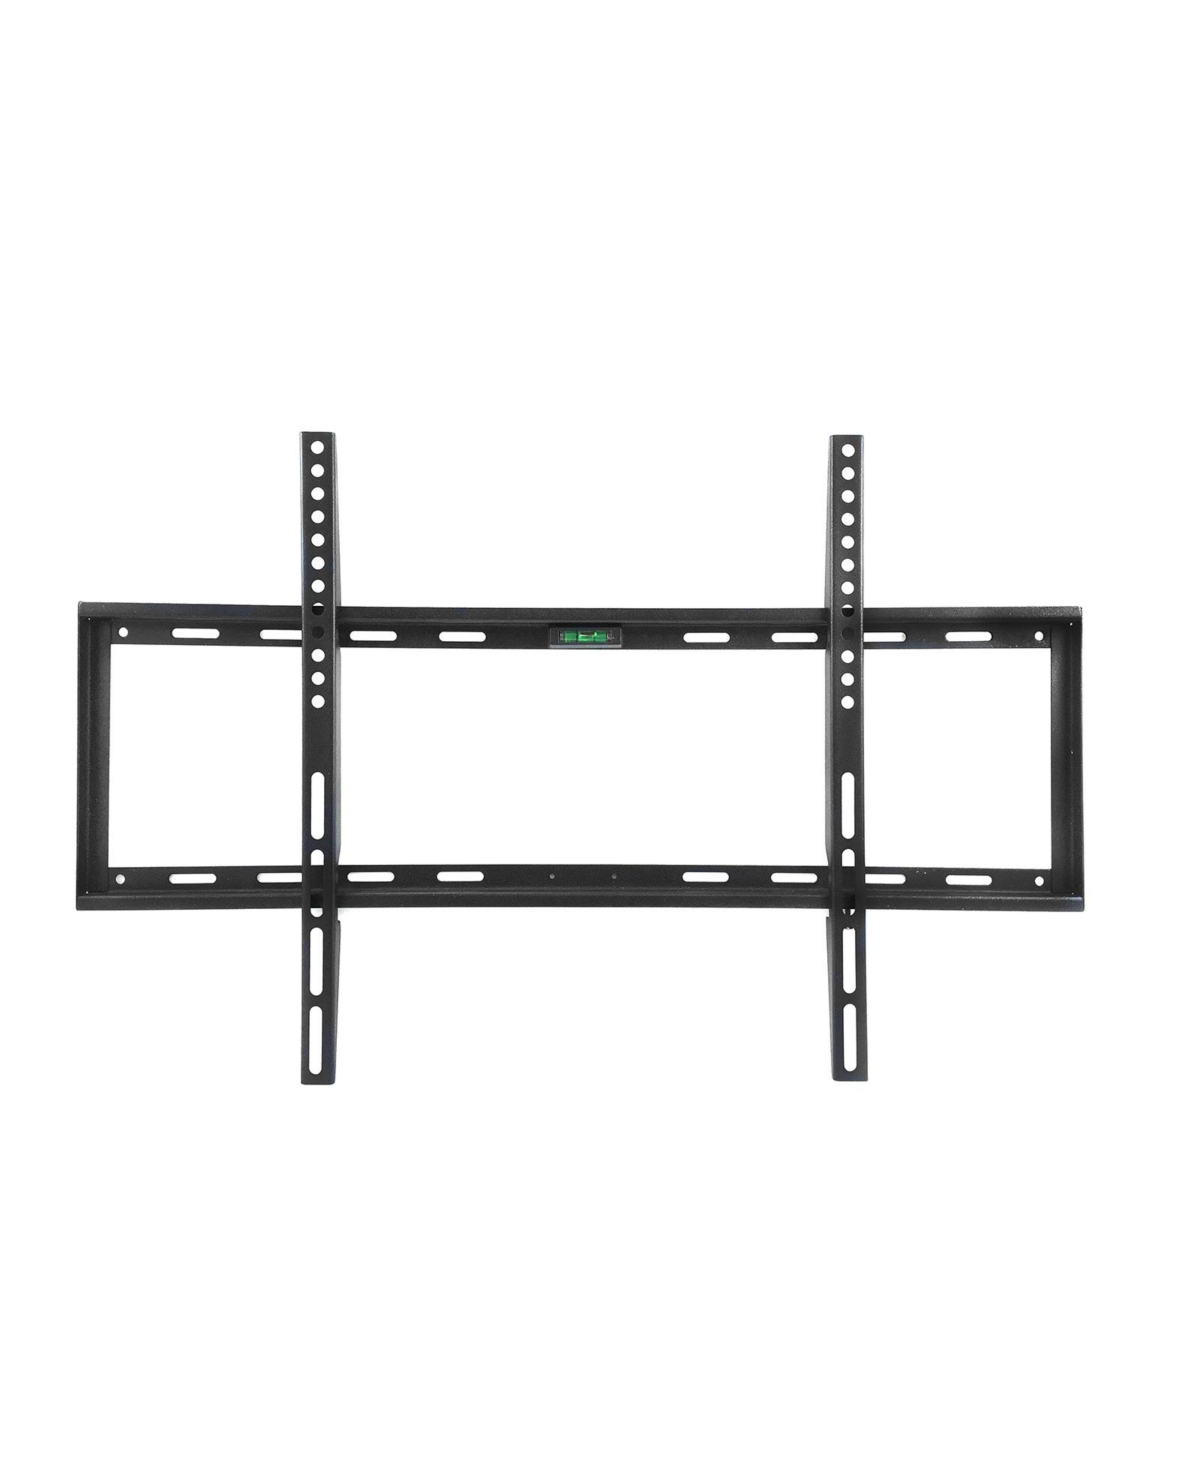 Smooth Black Matt Finish Fixed Television Mount for 26 - 55 Inch Plasma/Lcd/Led Televisions - Black